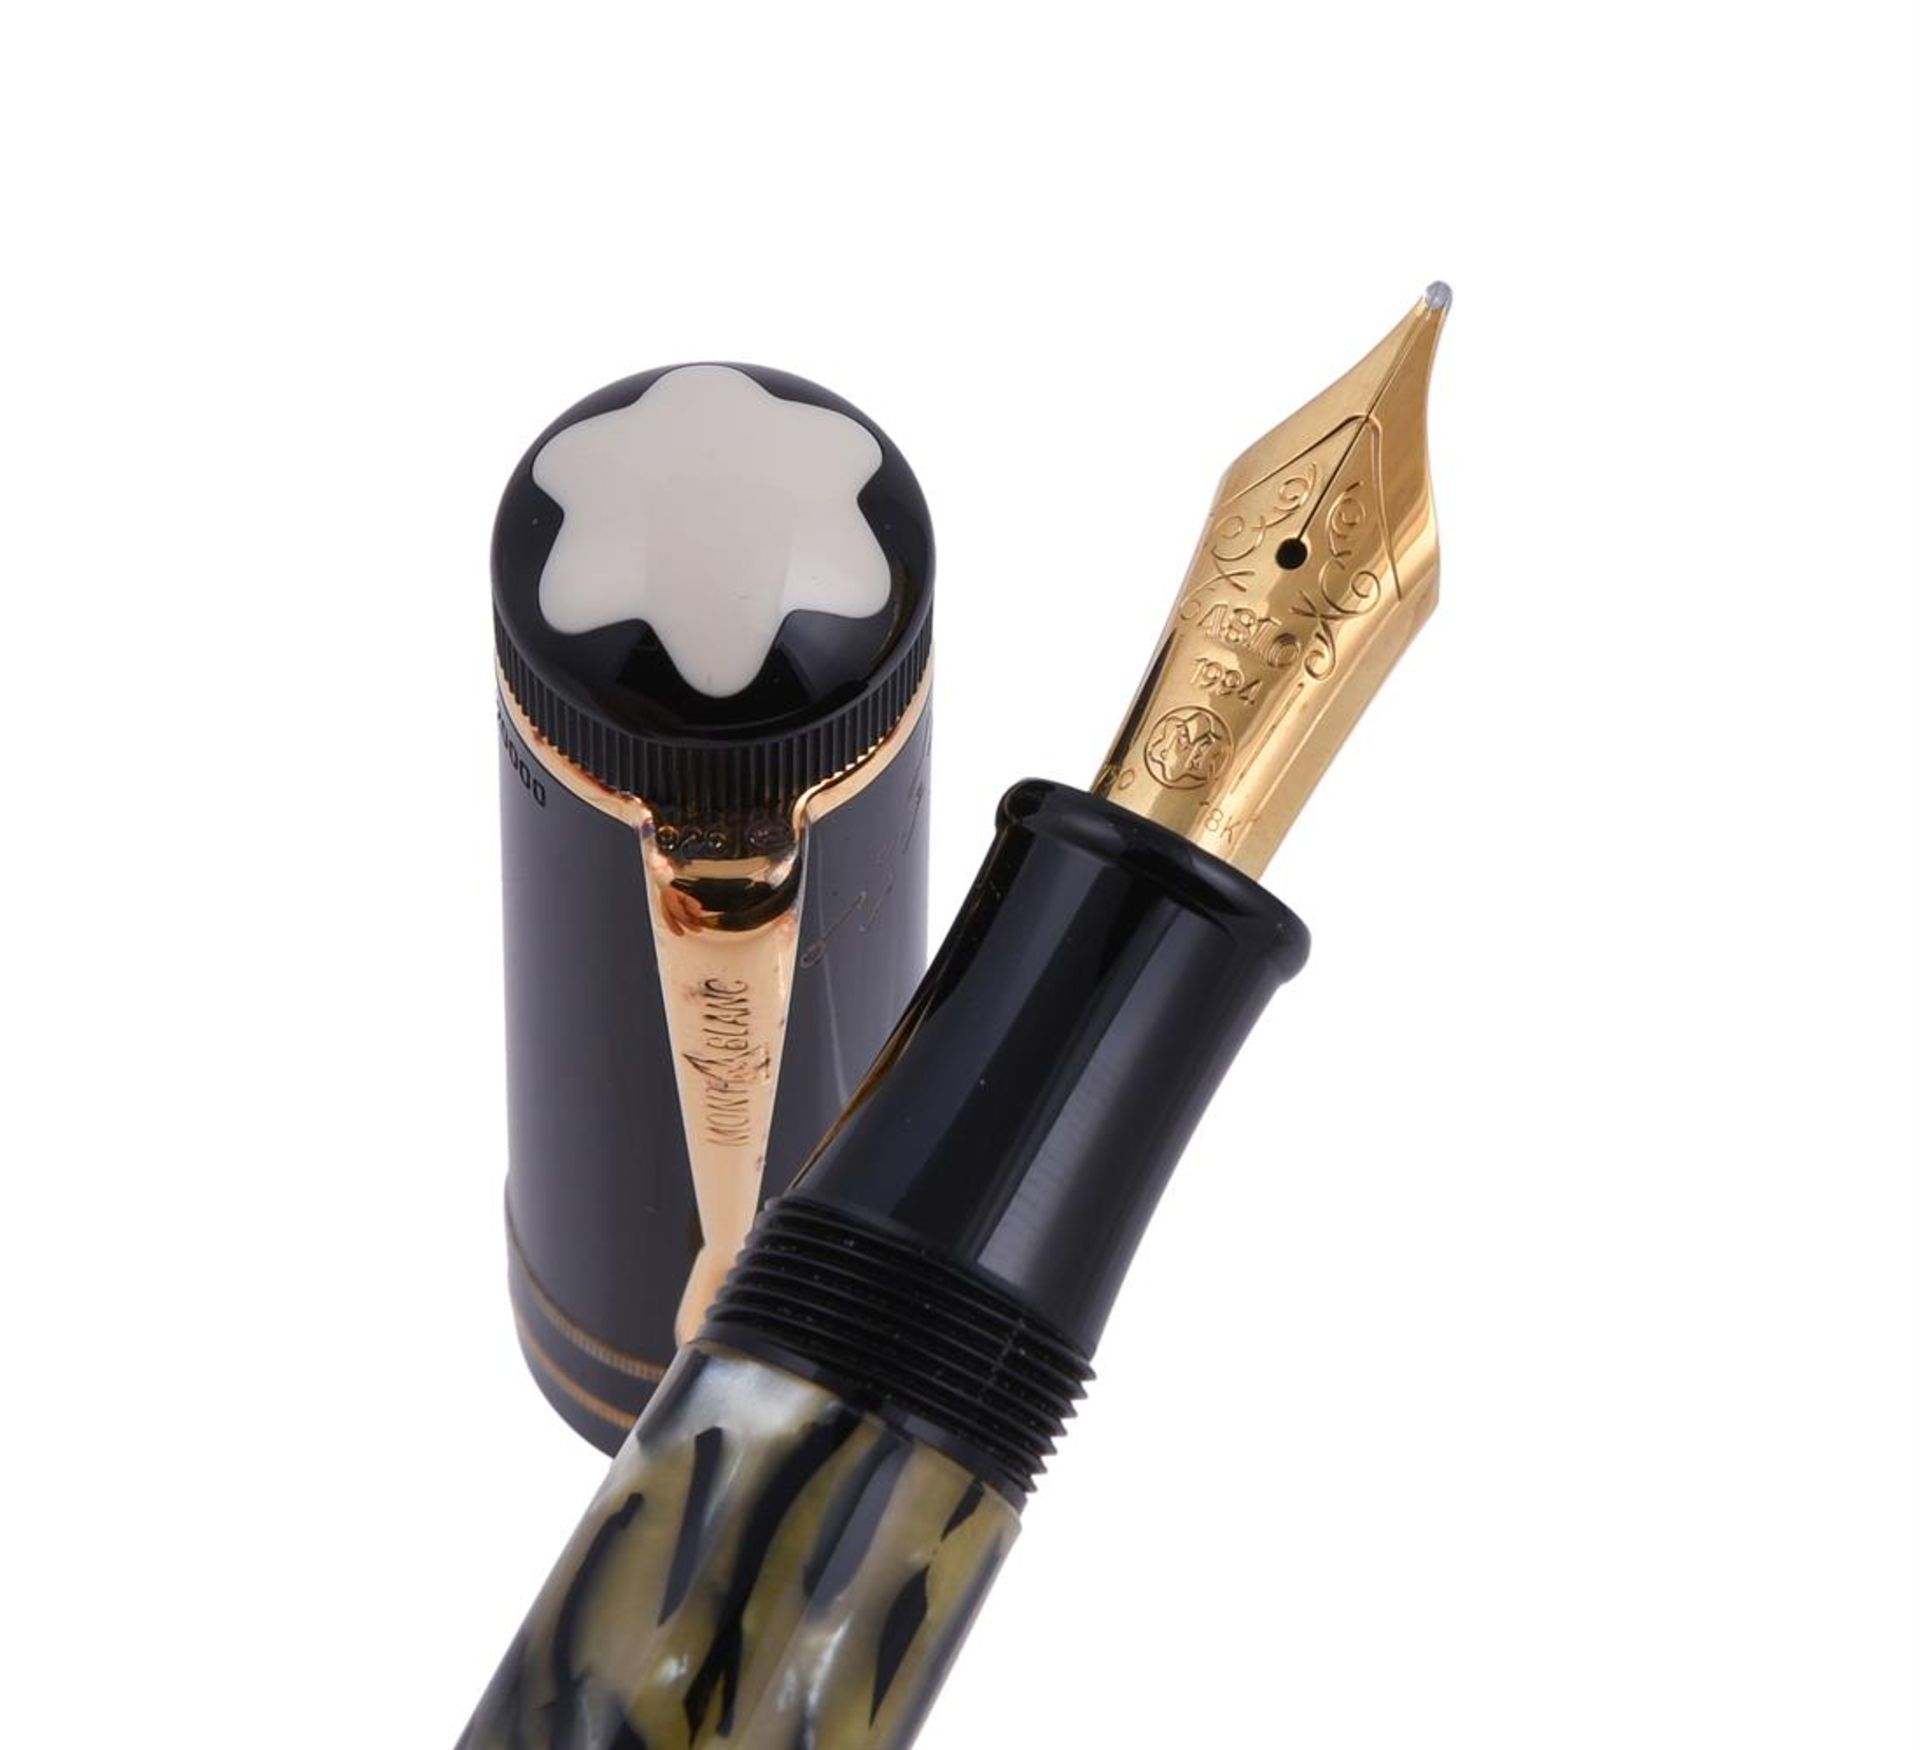 MONTBLANC, WRITERS EDITION, OSCAR WILDE, A LIMITED EDITION THREE PIECE SET - Image 2 of 3